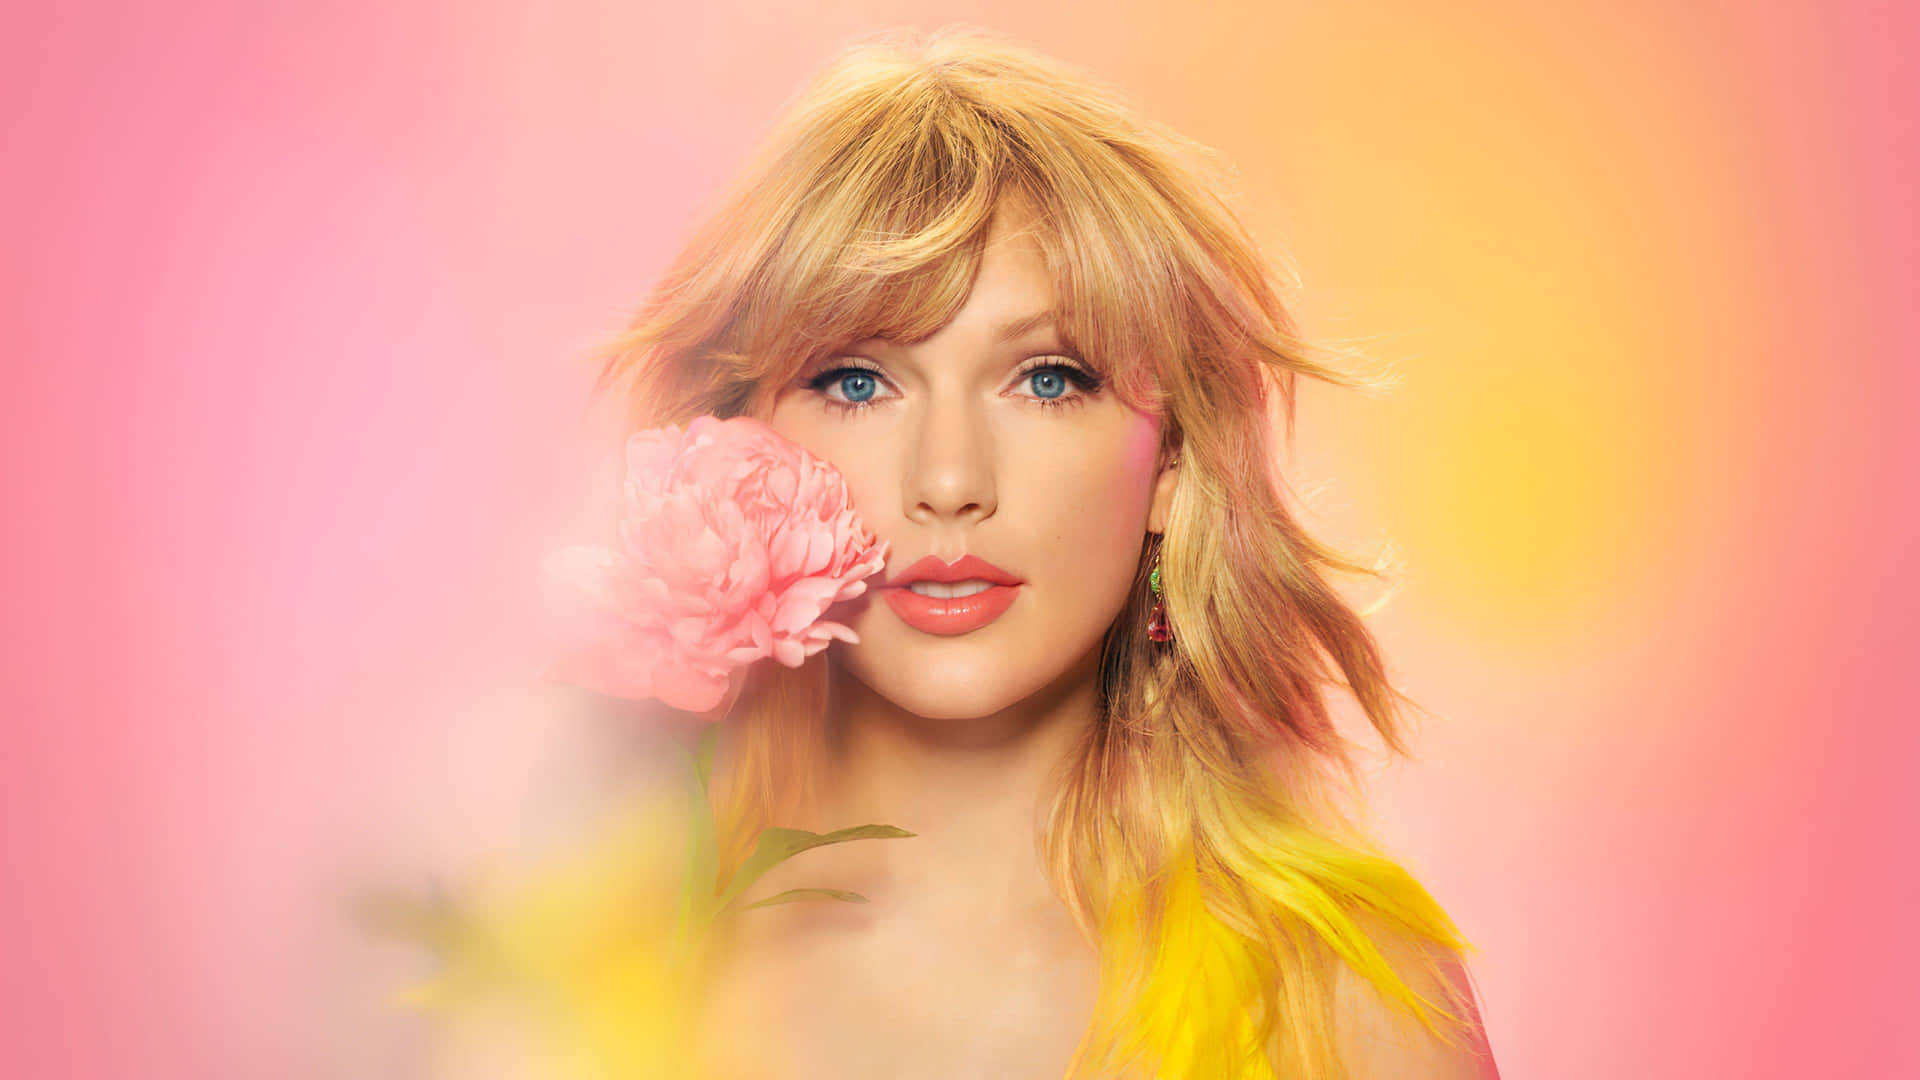 Taylor Swift Pastel Floral Aesthetic Wallpaper